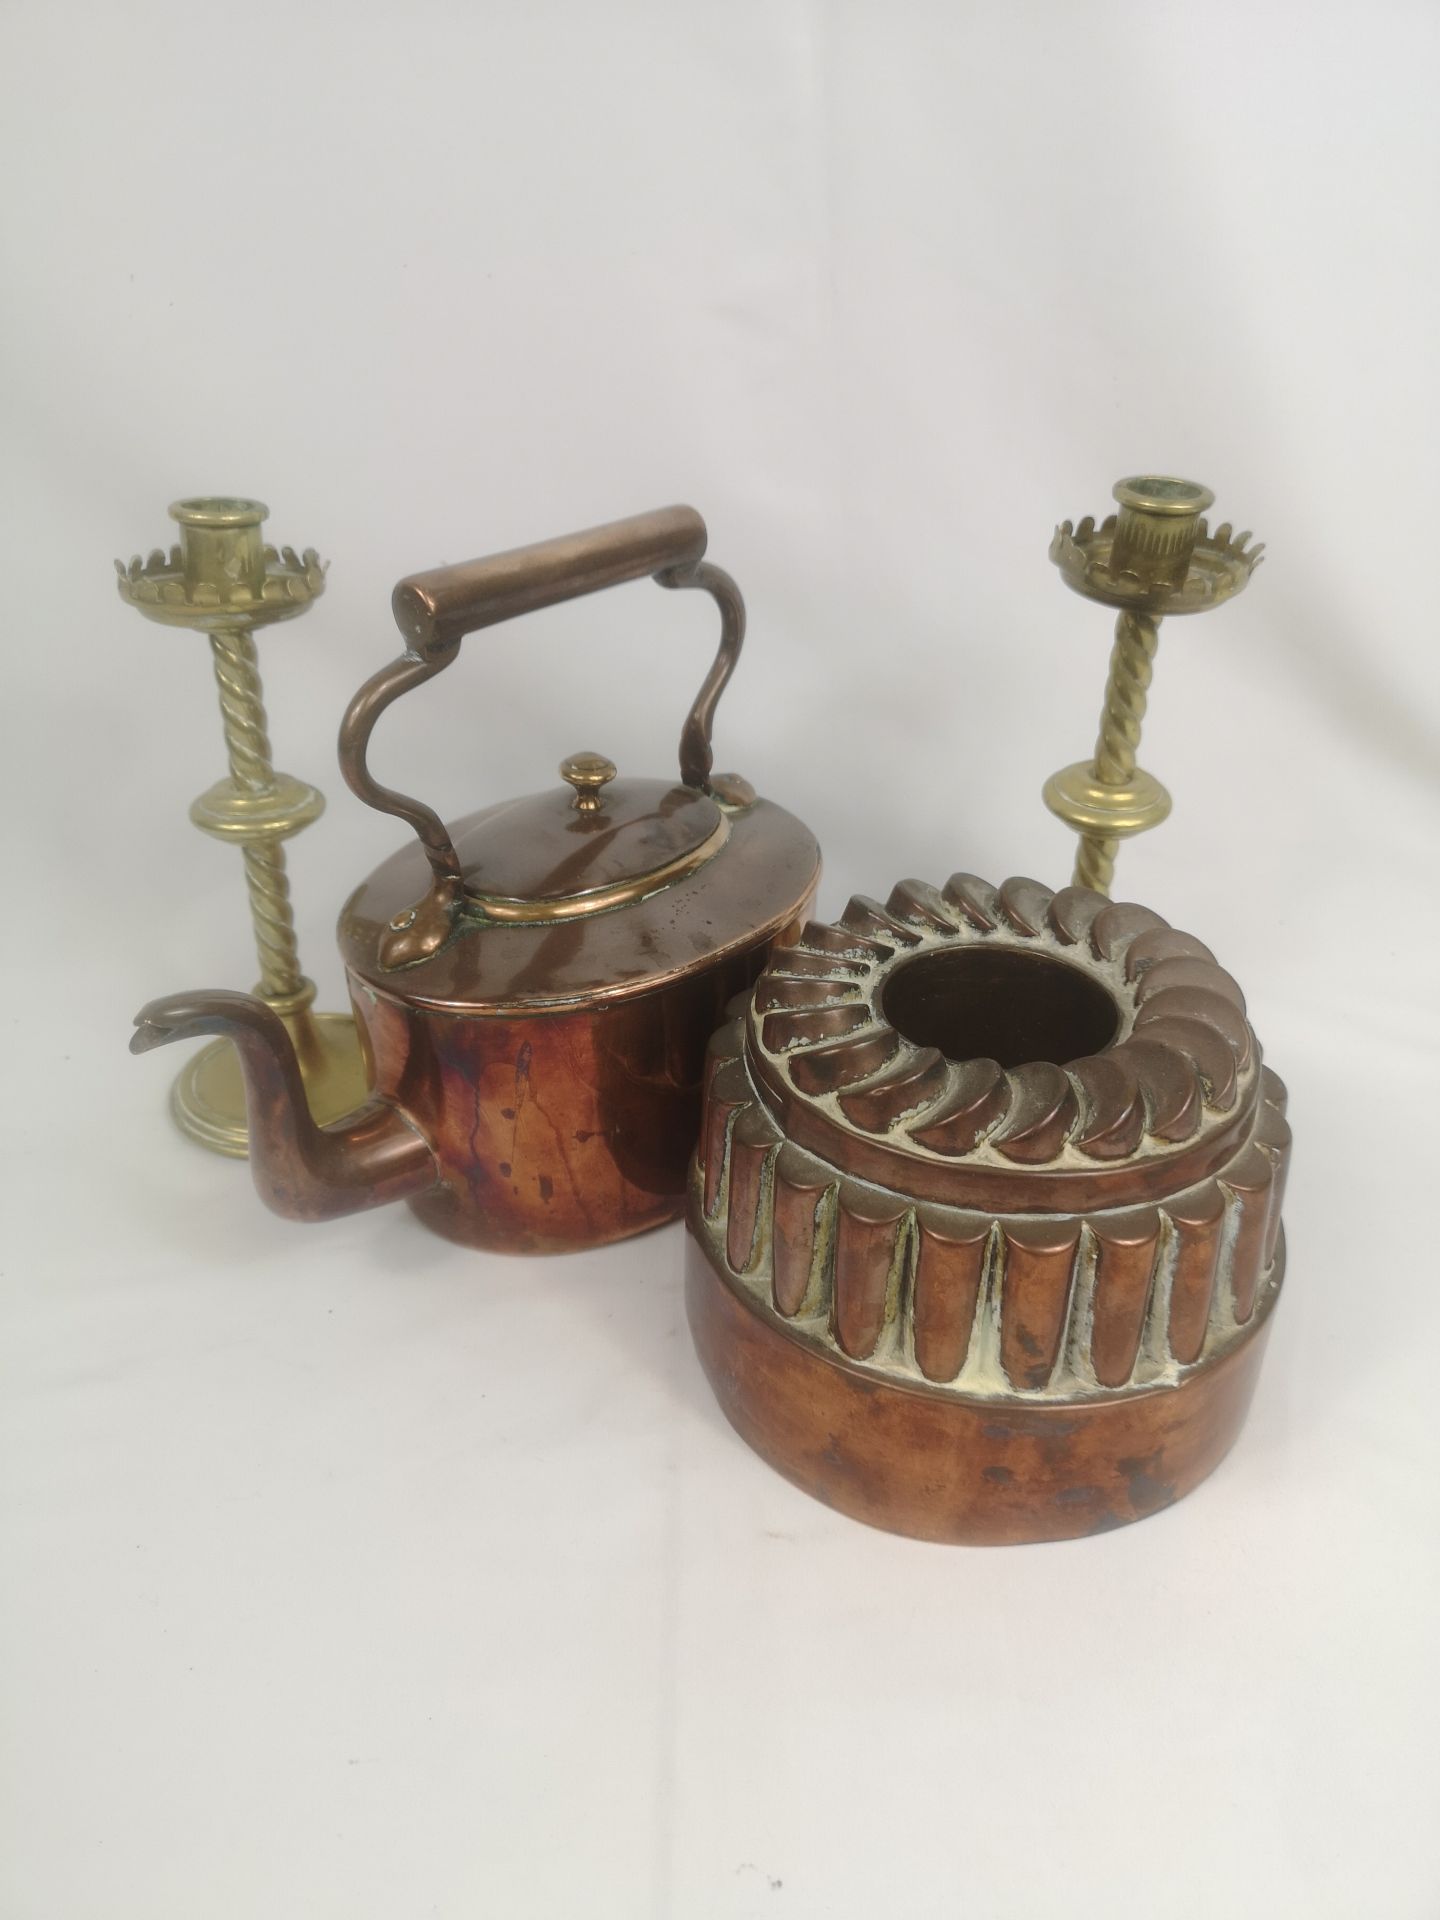 Victorian copper coal scuttle, copper jelly mould and pair of brass candlesticks